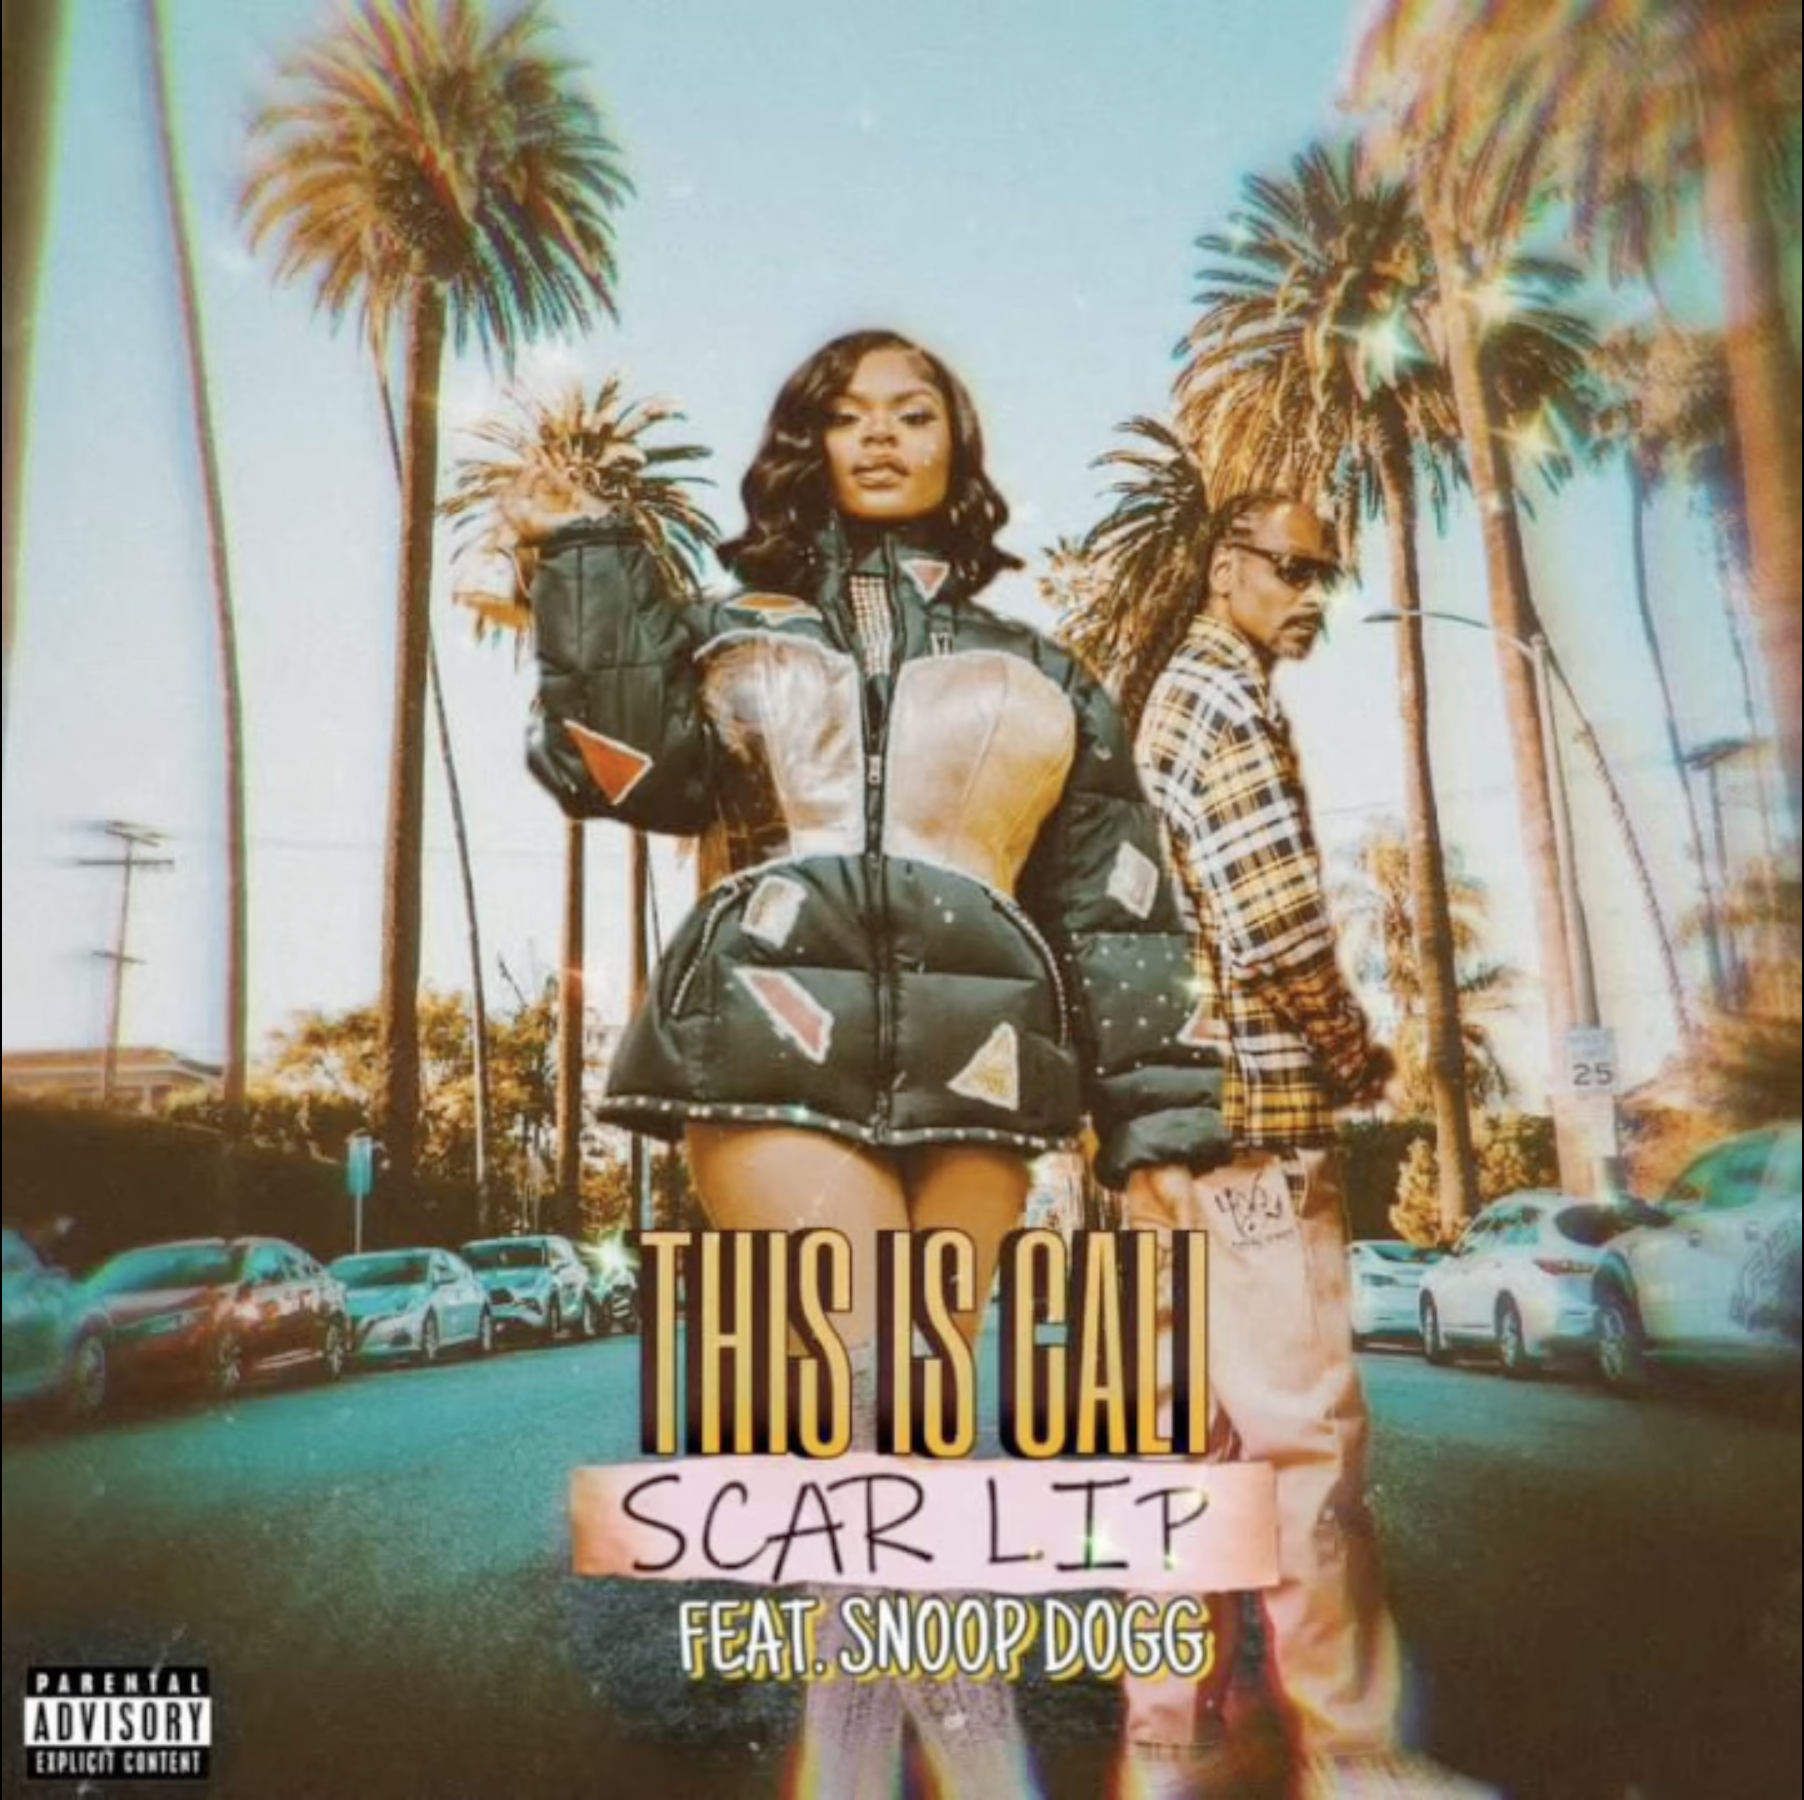 Snoop Dogg & Scar Lip Show Us That “This Is Cali” On New Remix